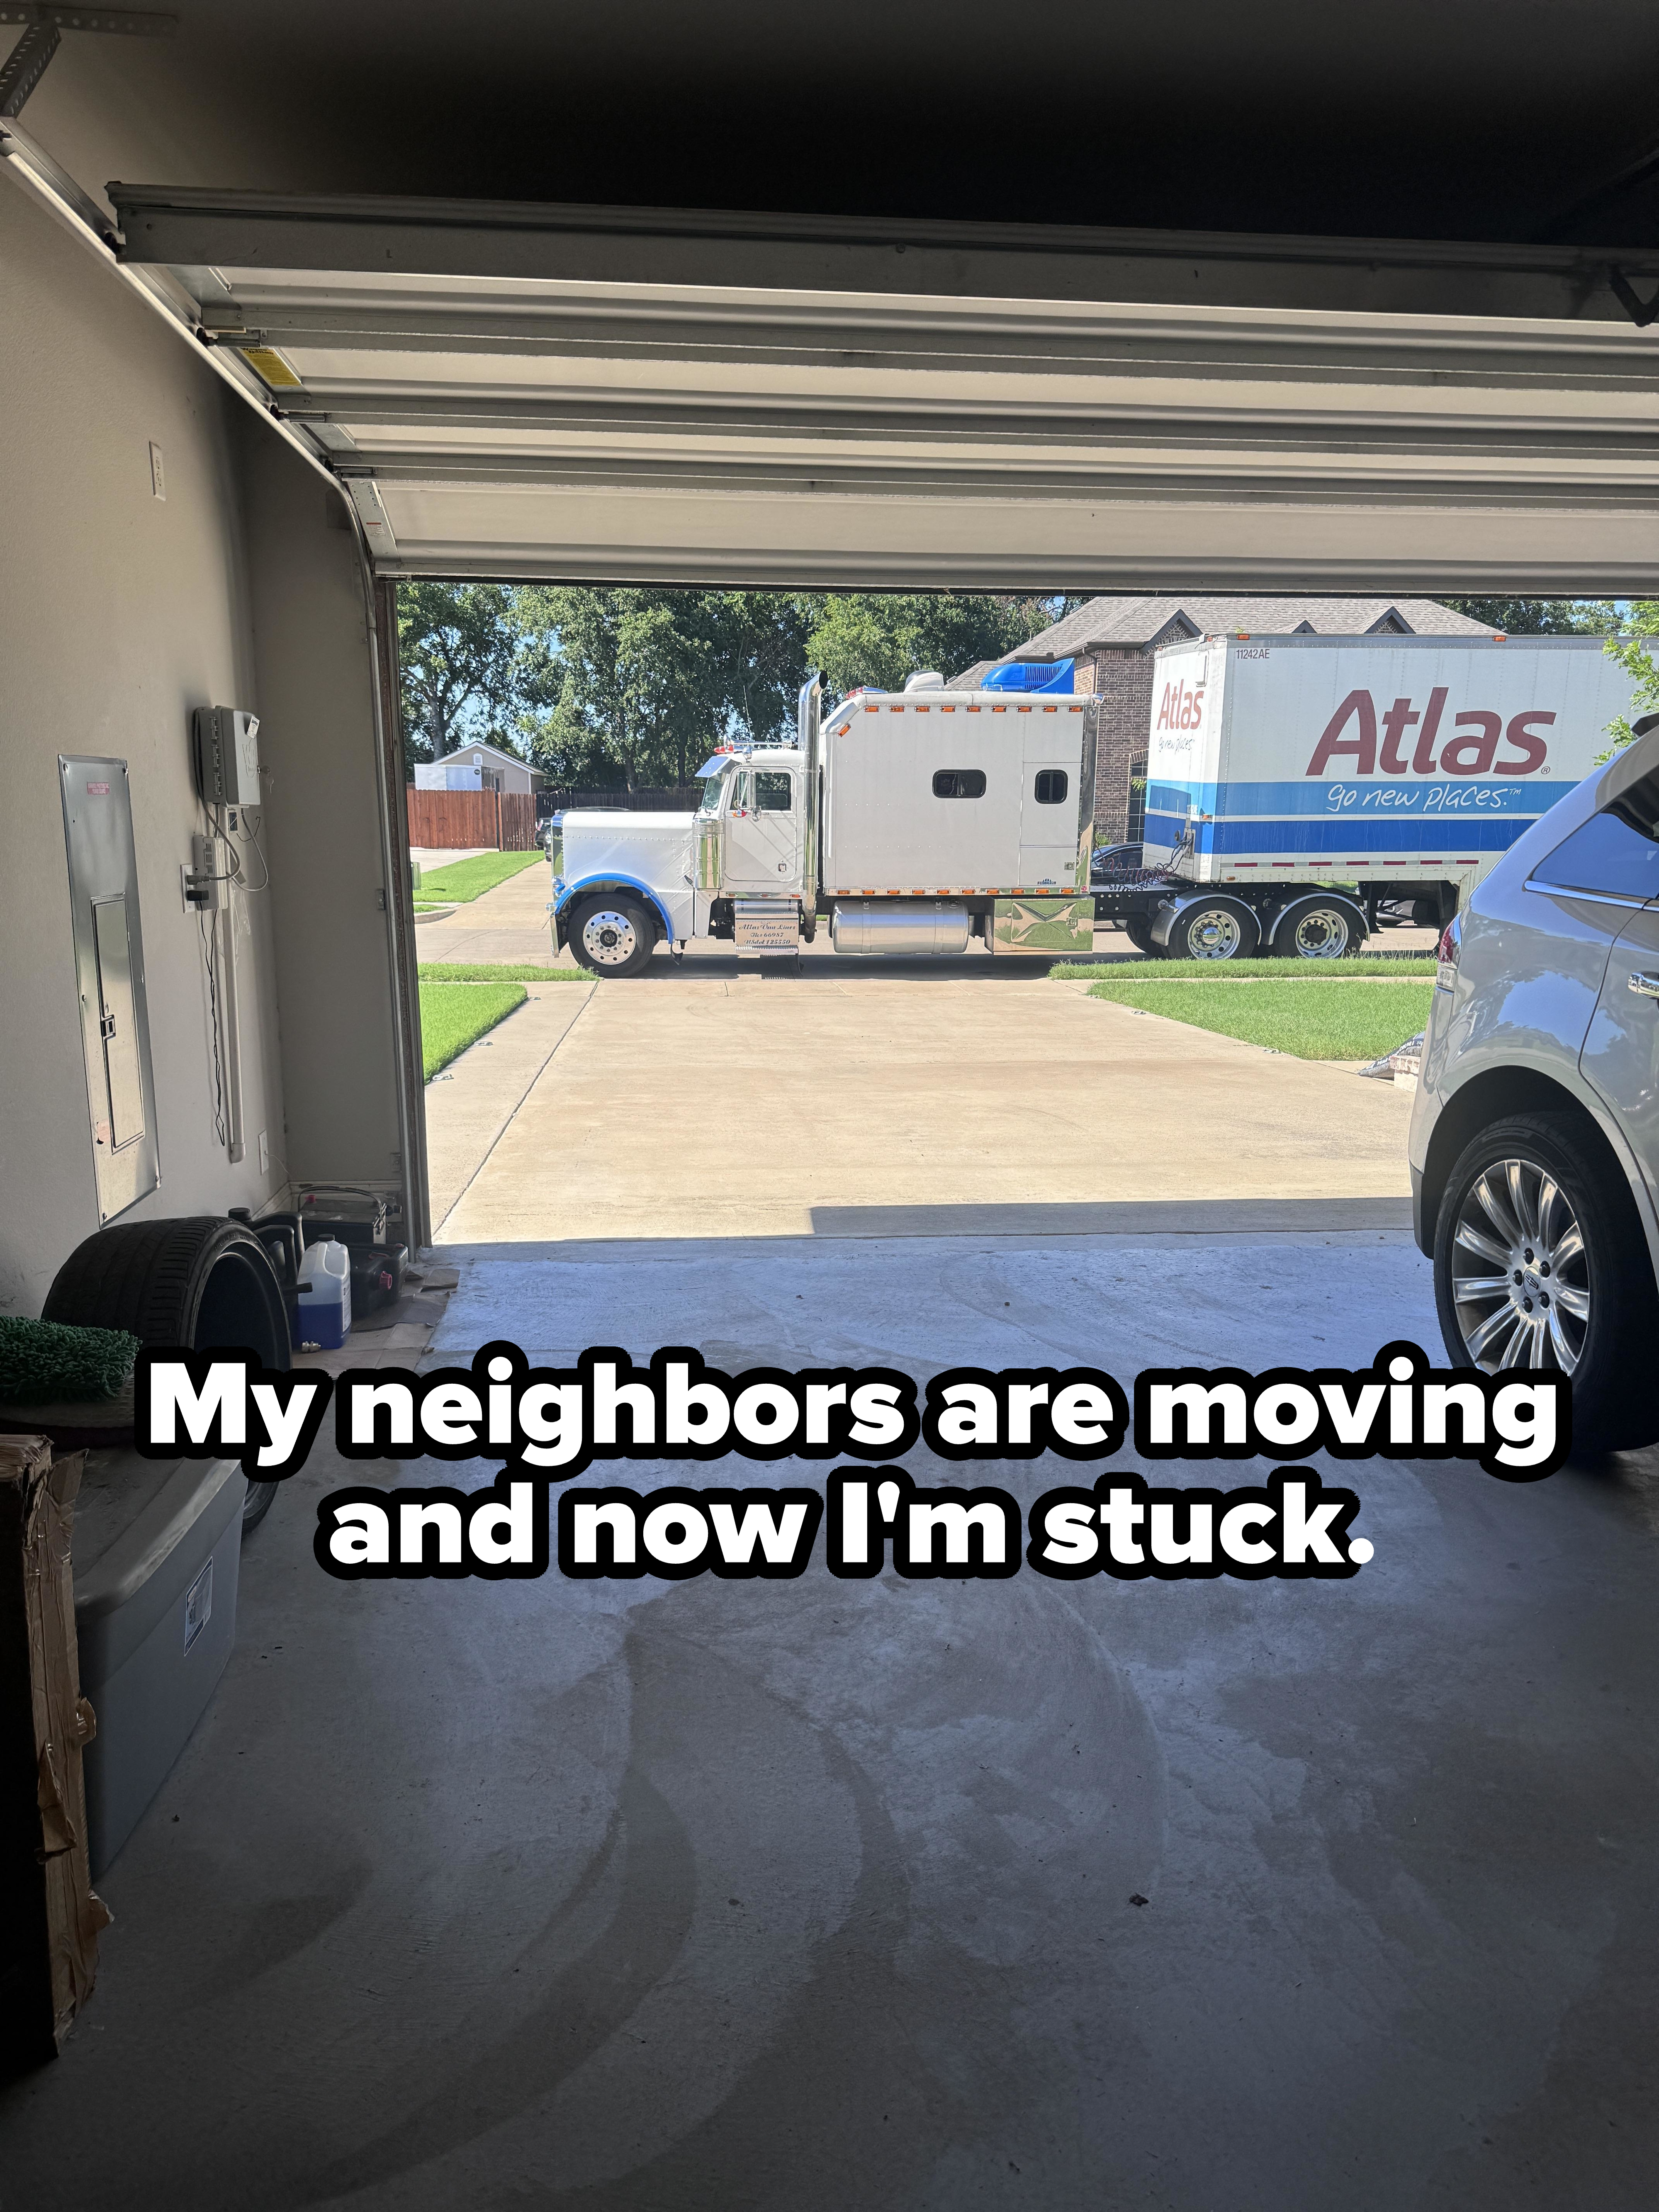 Open garage showing a moving truck labeled &quot;Atlas&quot; and a parked SUV. Nearby items include bins and household tools. No people are present